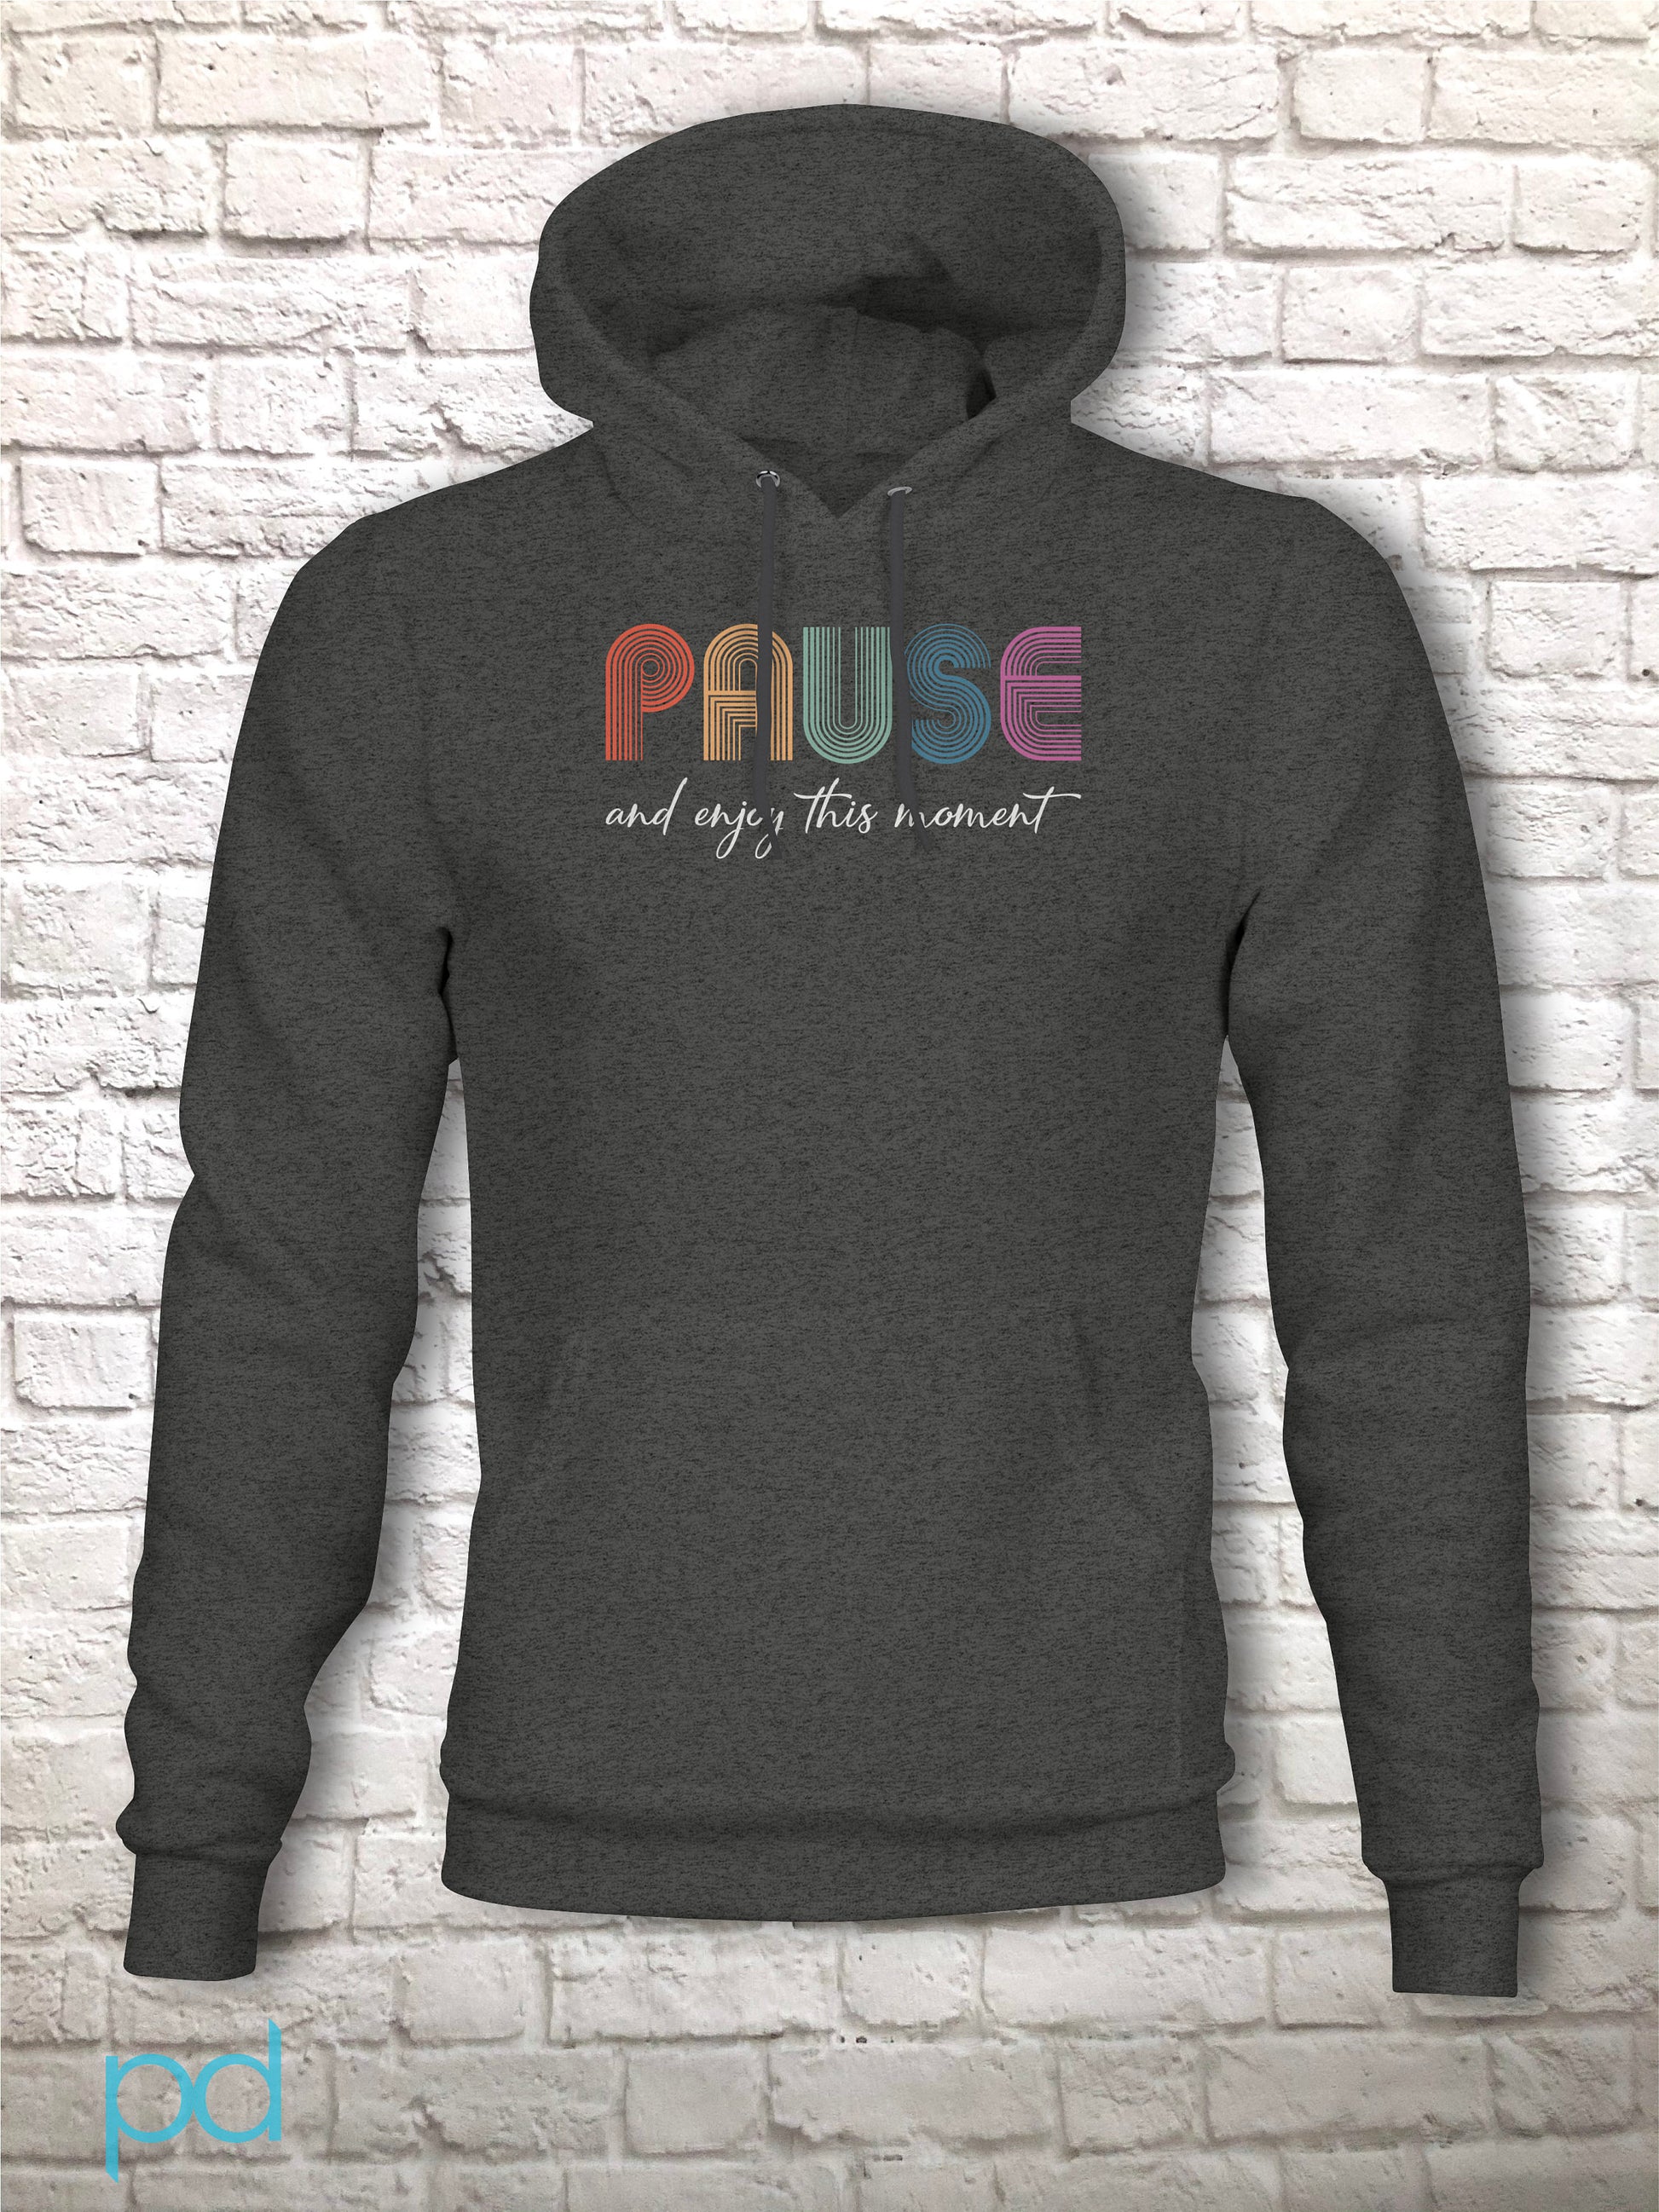 PAUSE Hoodie, Calm Reflection Birthday Gift Hooded Sweatshirt in Retro Vintage 70s style, Chill Relax Hoody Sweat Shirt Top For Men or Women